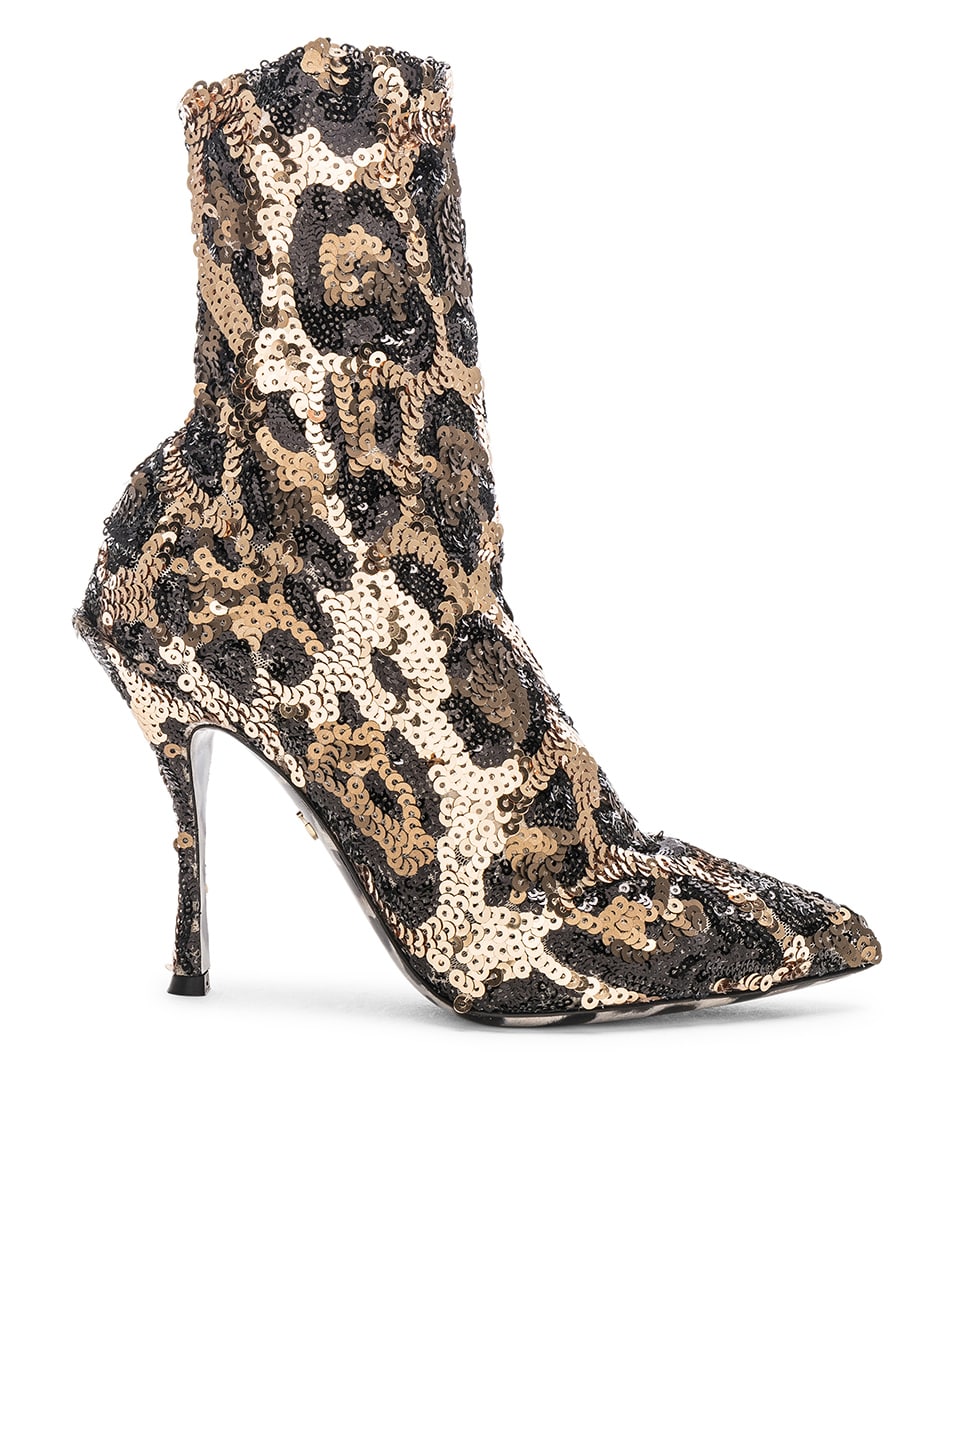 Image 1 of Dolce & Gabbana Leo Print Stretch Sequin Booties in Cheetah